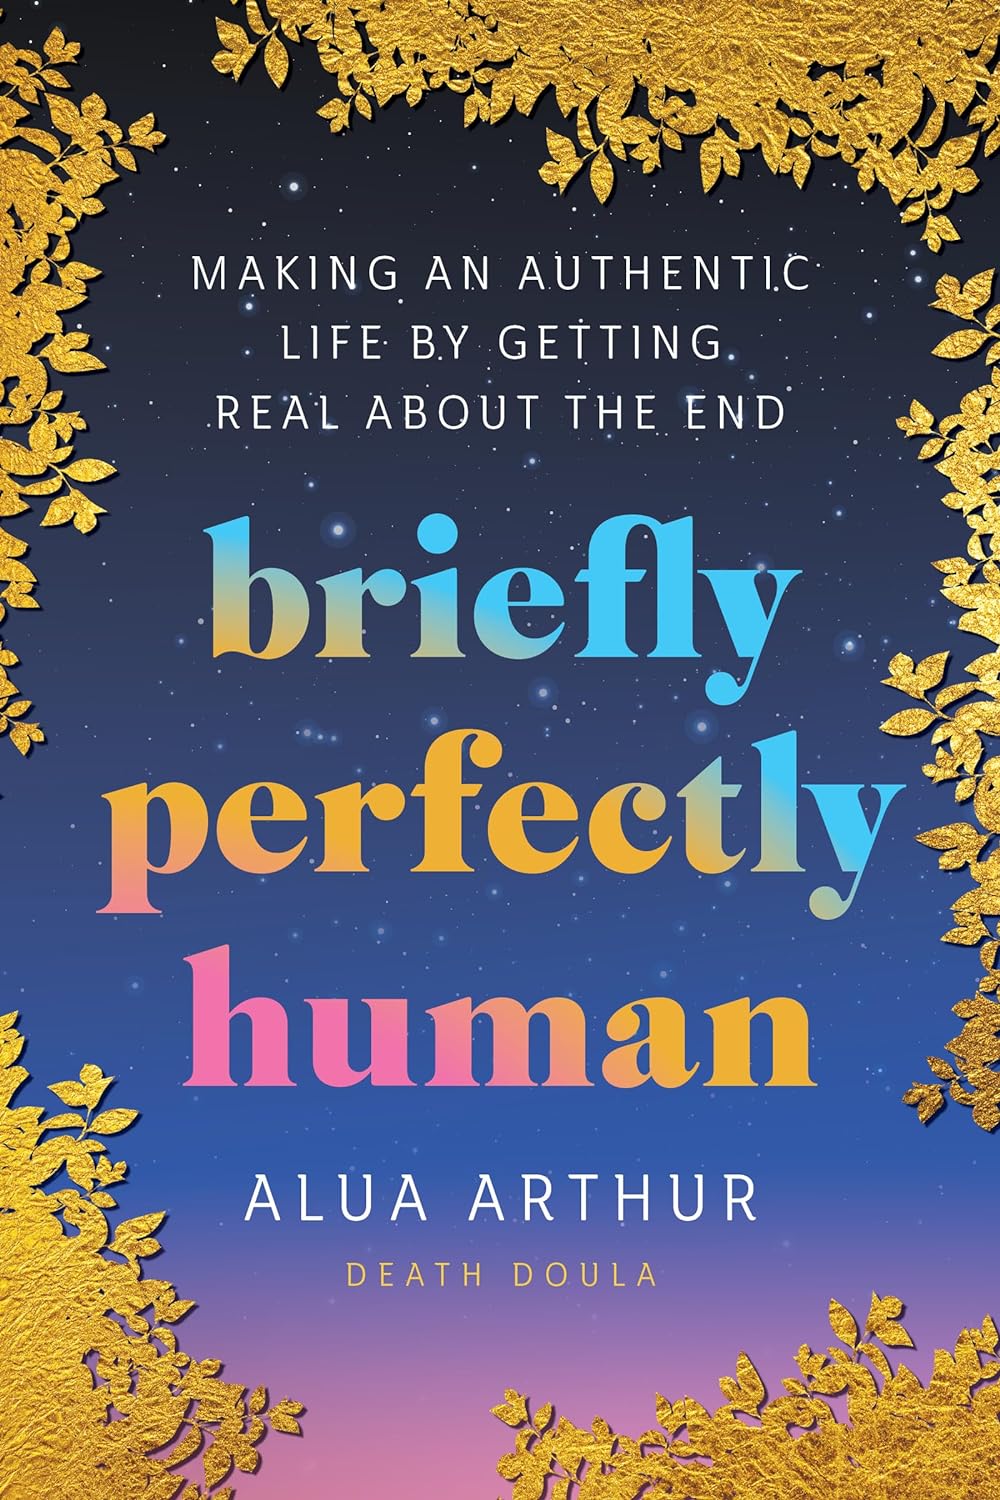 Book cover features a sky fading from purple to pink, framed with gold leaves, and text that is blue, gold and pink.